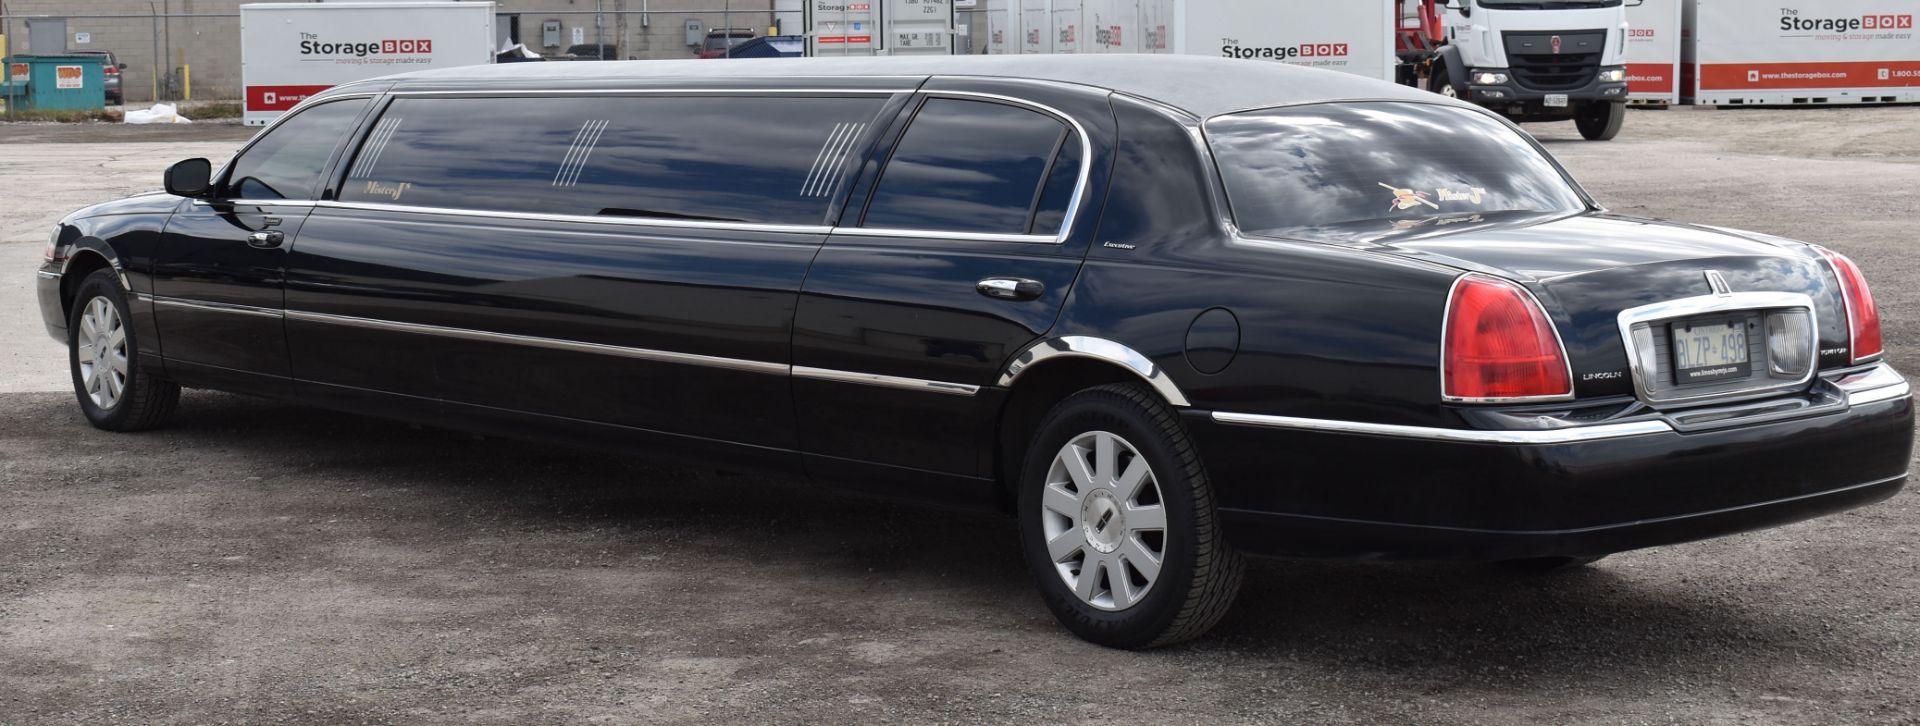 LINCOLN (2005) TOWN CAR 8 PASSENGER STRETCH LIMOUSINE WITH 8 CYLINDER 4.6L GAS ENGINE, 240,687KM ( - Image 6 of 20